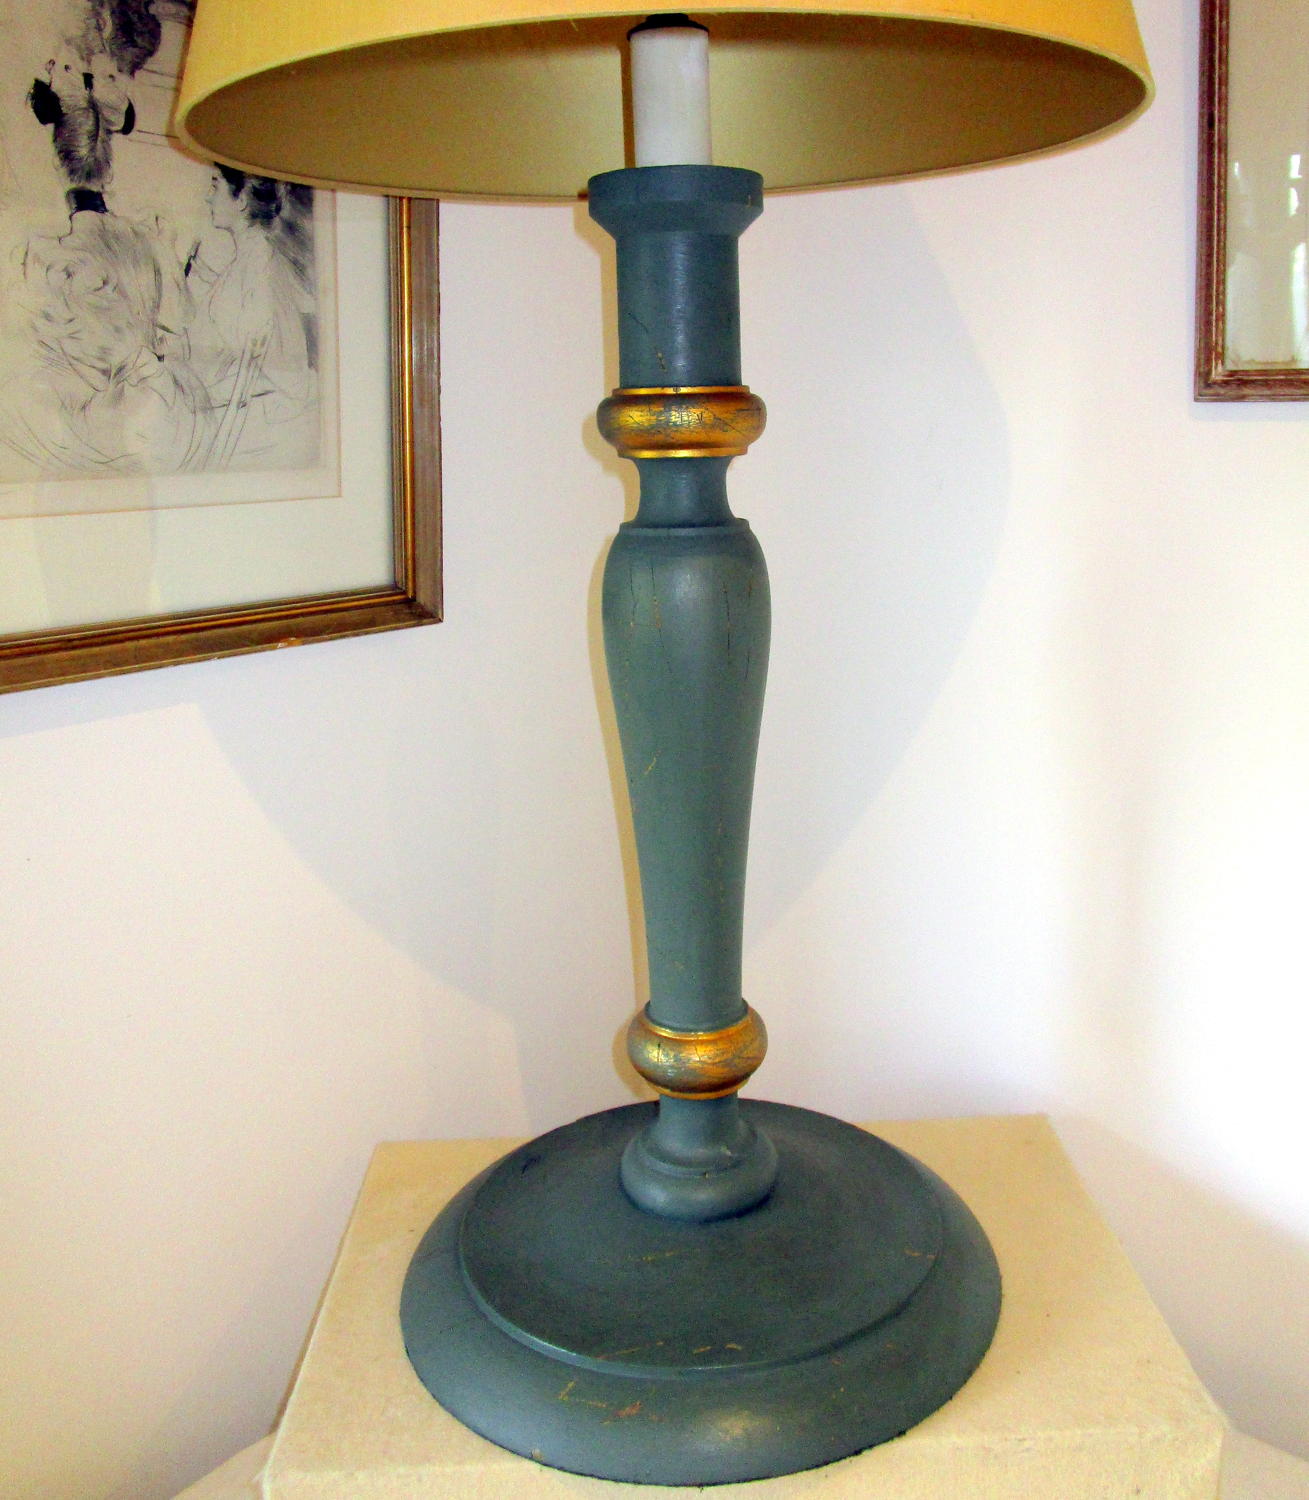 Oversize candlestick, sage green and gold